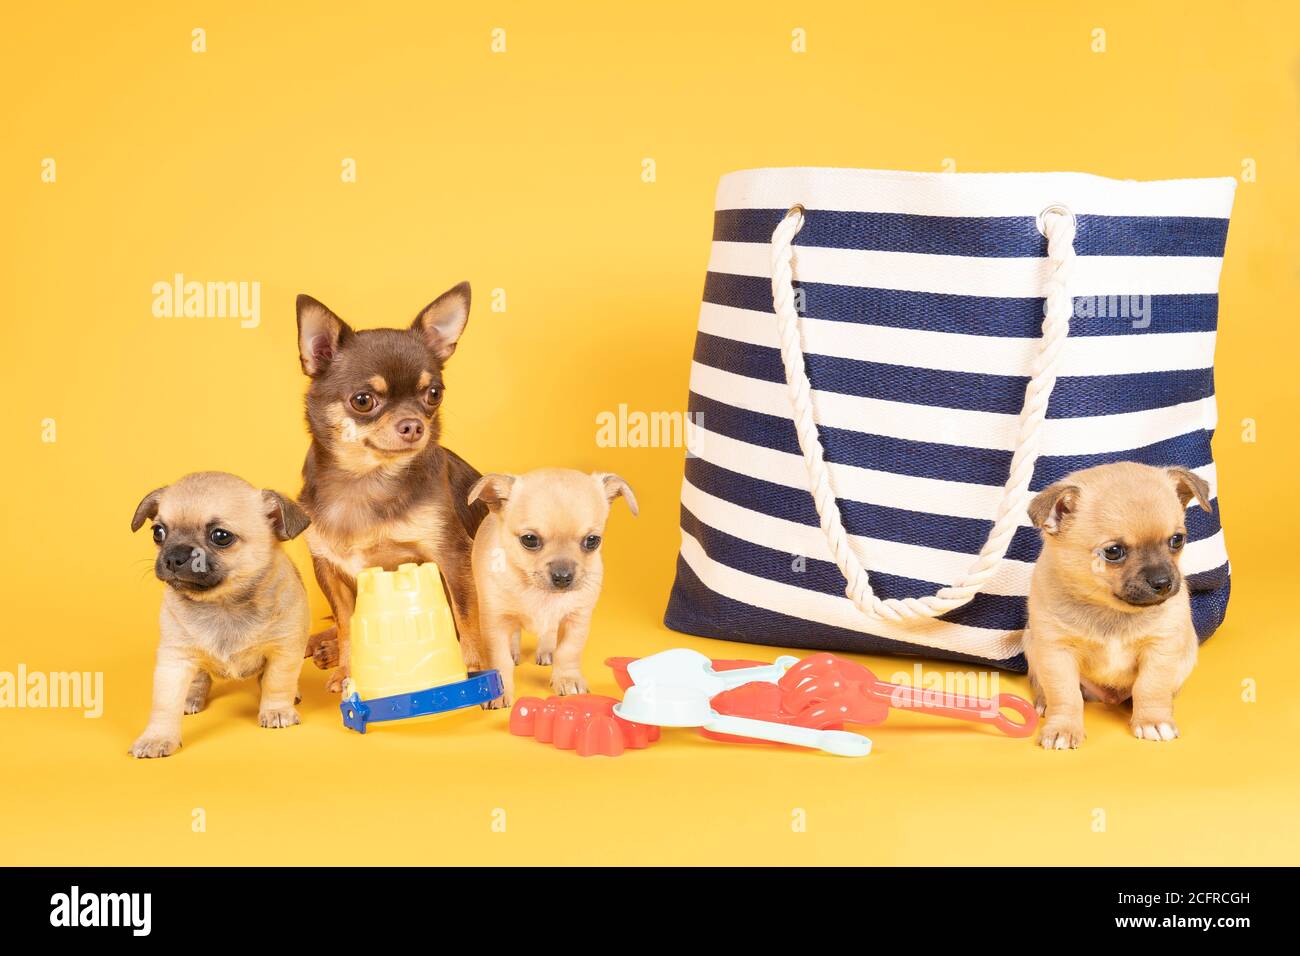 Funny scene with mother chihuahua and three puppies on an day out at the beach with a bag and beach toys Stock Photo